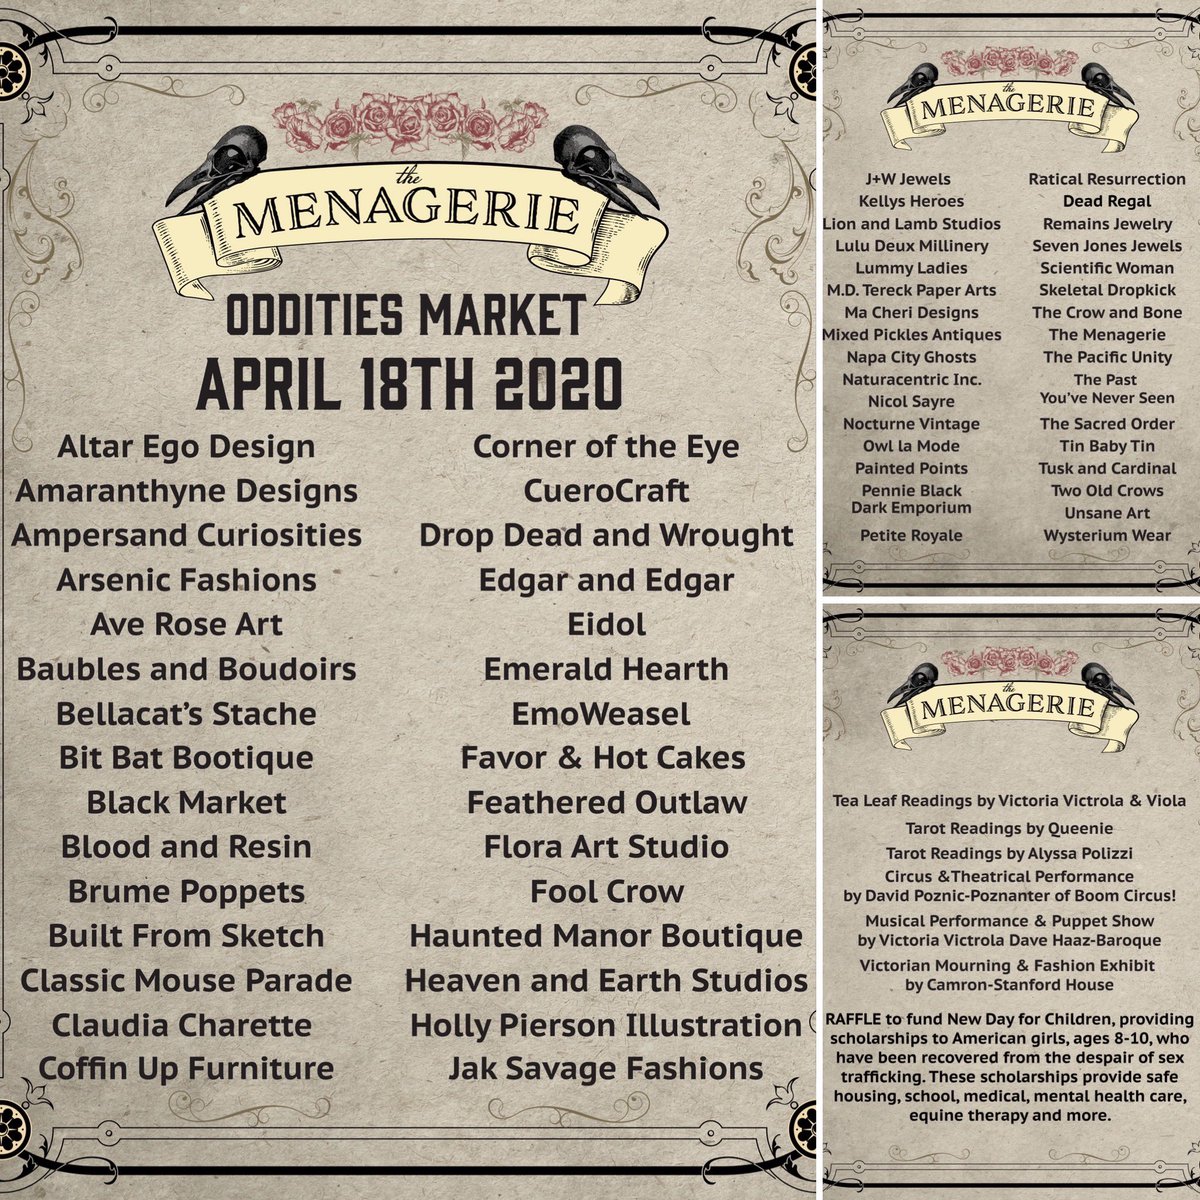 🎩Join the official #odditiesandcuriosities market of the SF Bay Area SAT 4/18 at the Elks Lodge #alameda for a day of #victorian inspired art, exhibits & more...visit👉 themenagerie.eventbrite.com Tickets on sale now🎟
#themenageriealameda #themenagerieodditiesmarket #sfoddities